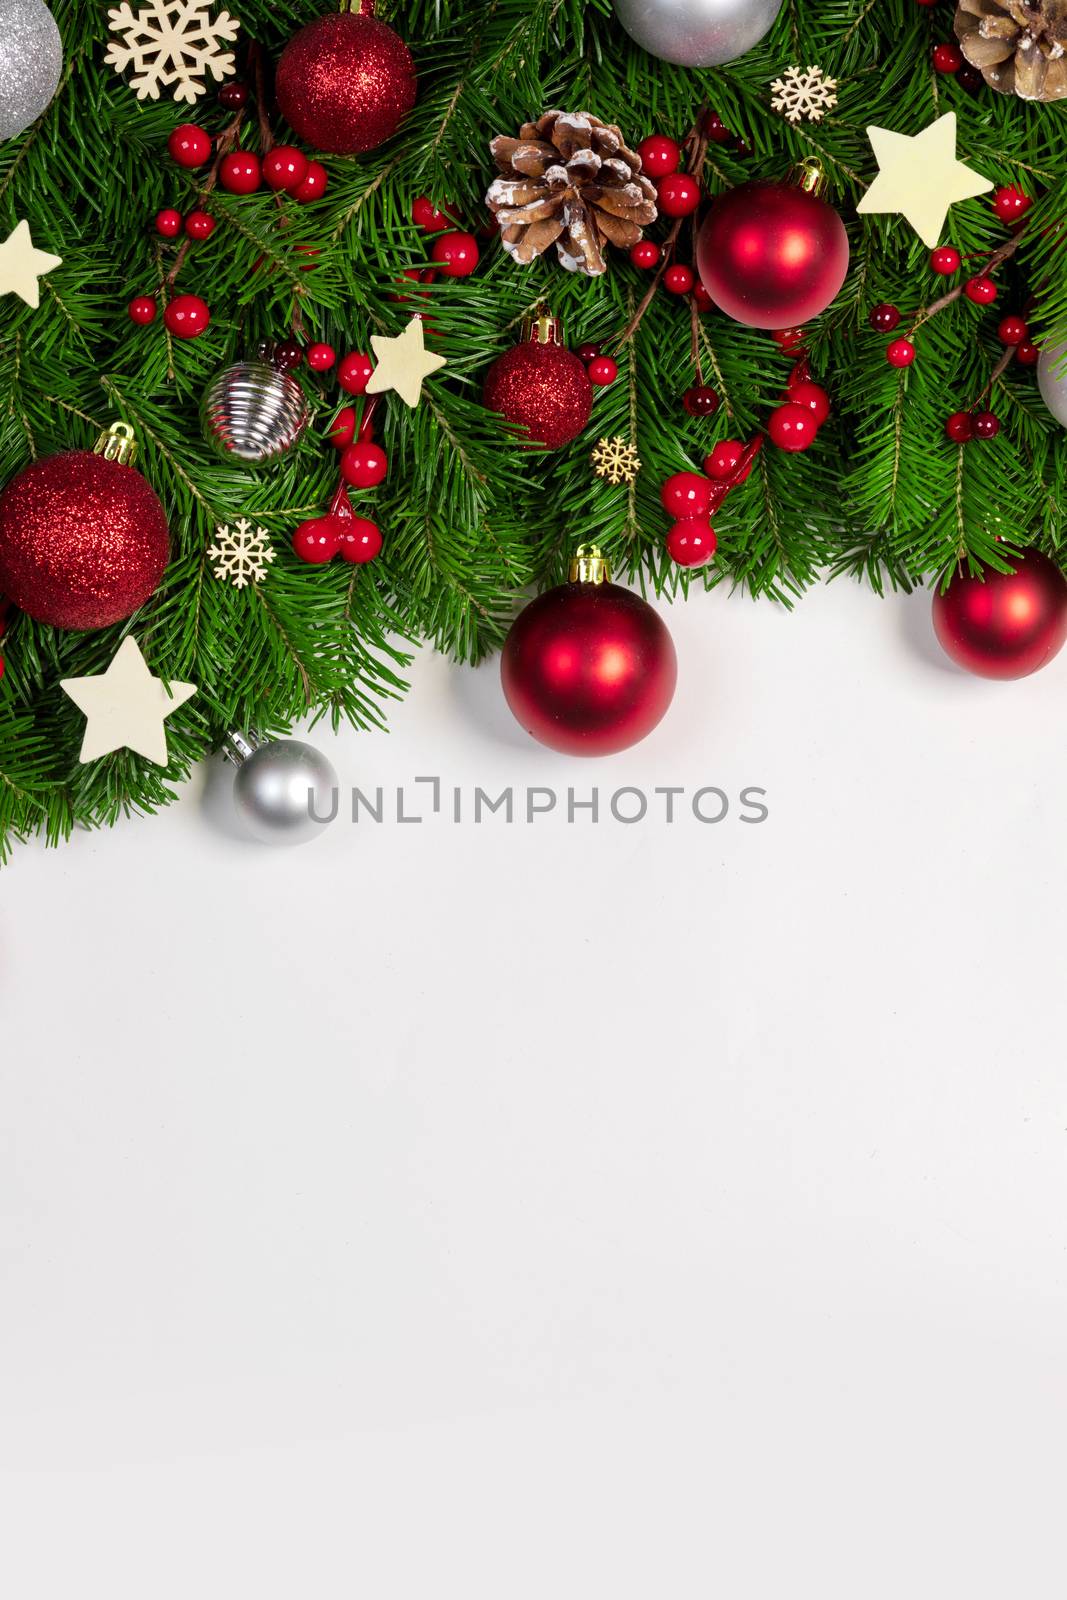 Christmas Border frame of tree branches on white background with copy space isolated, red and golden decor, berries, stars